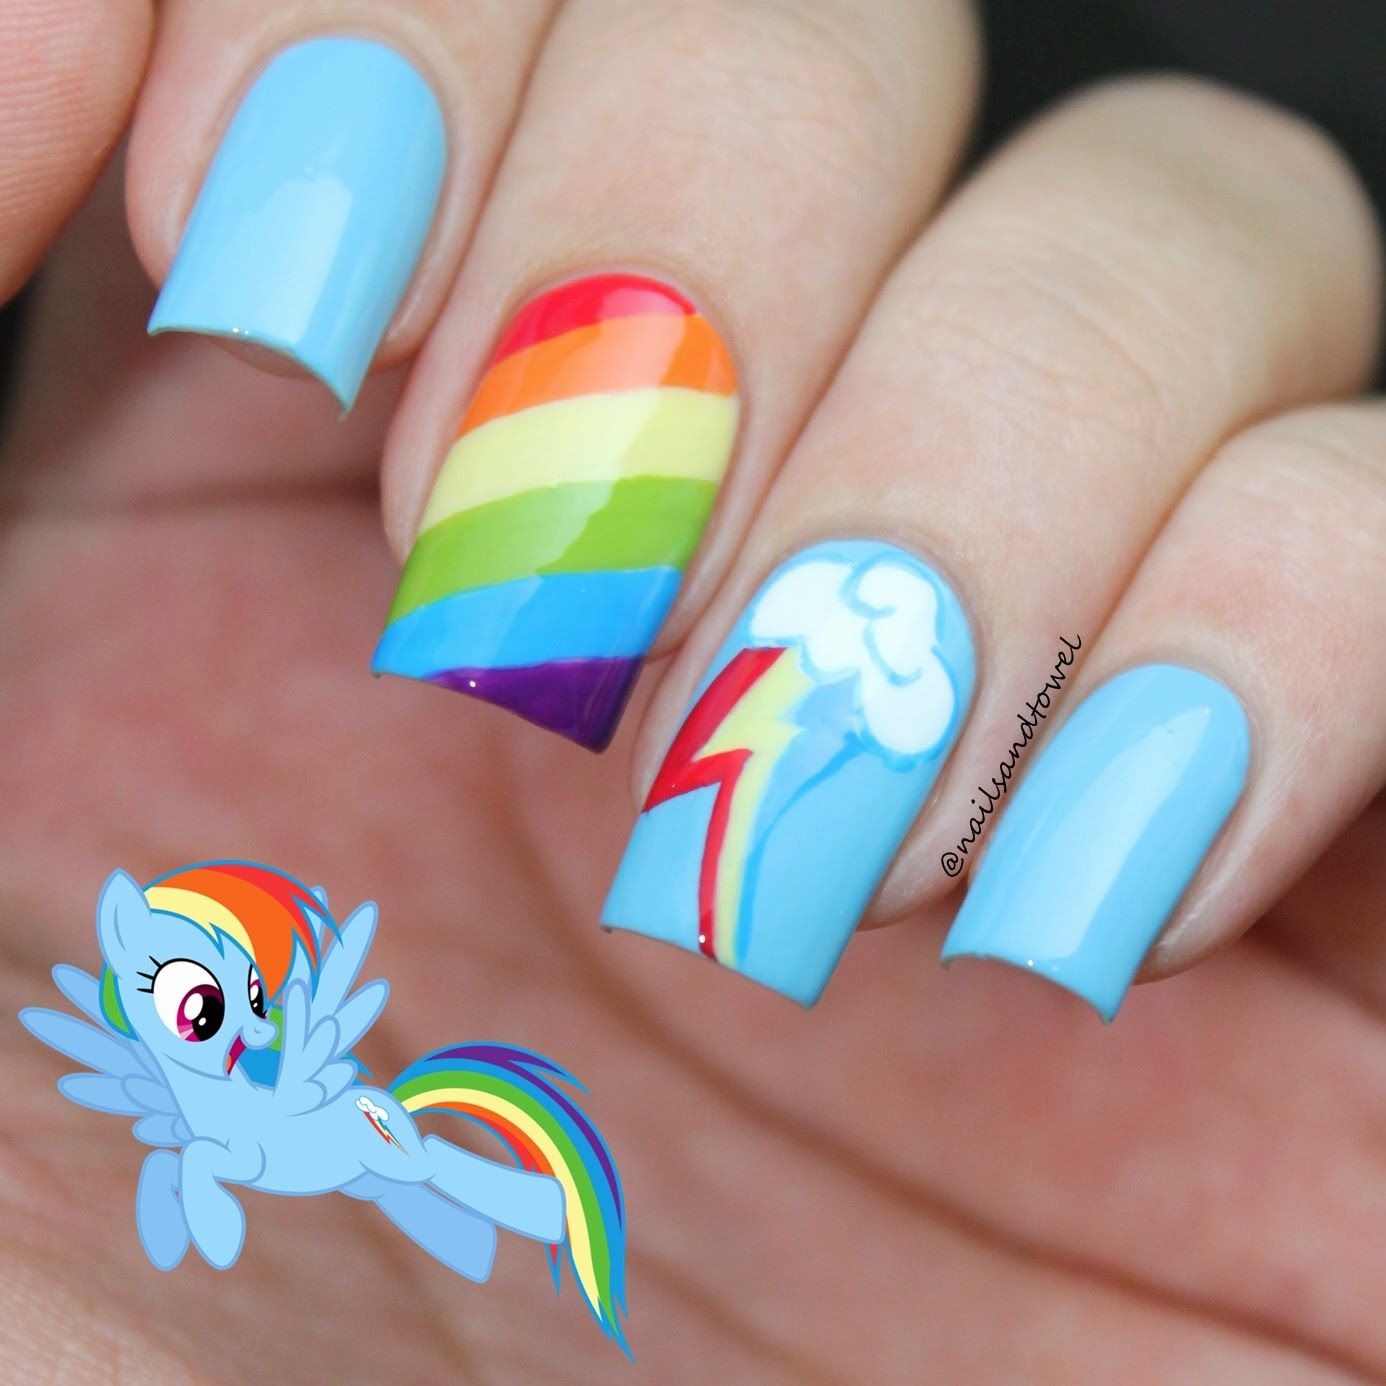 Pretty Nails For Kids
 My Nail Art Journal My Little Pony Nails Inspired